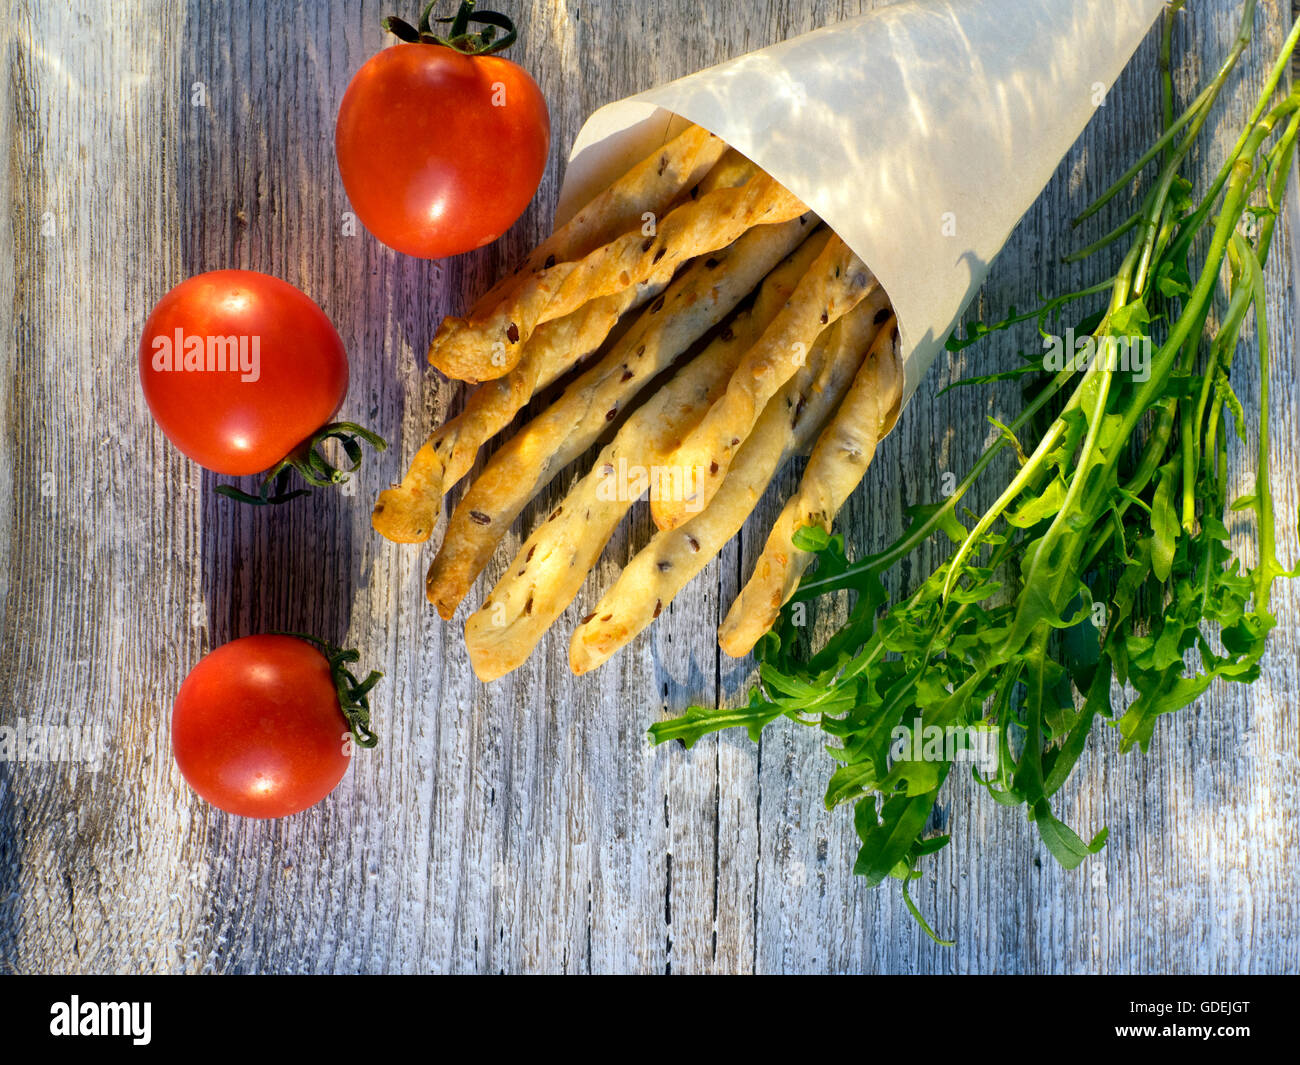 overhead view of bread sticks, fresh rucola leaves and tomatoes Stock Photo